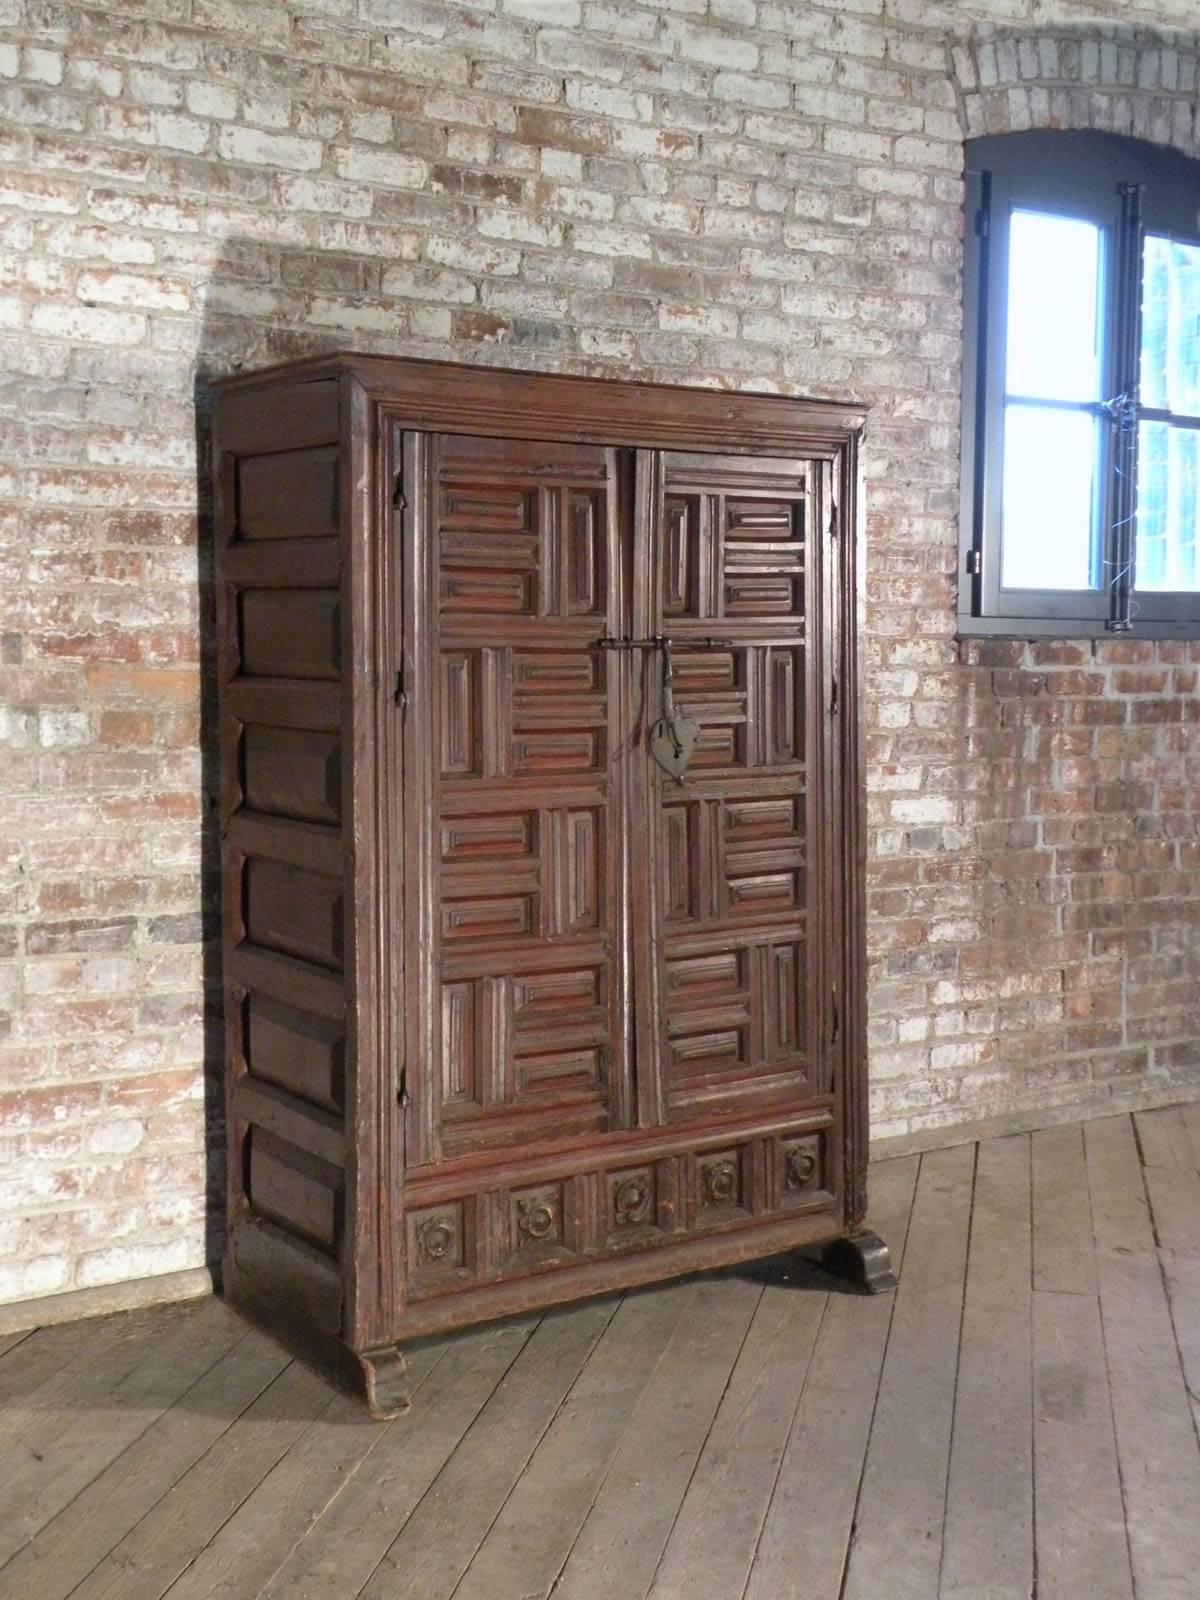 Small two-door wardrobe with an interesting conceptual look.
The geometrically paneled and molded doors with an iron bolted lock opening to an interior featuring a top shelf above a hanging rod. The later green painted interior contrasting